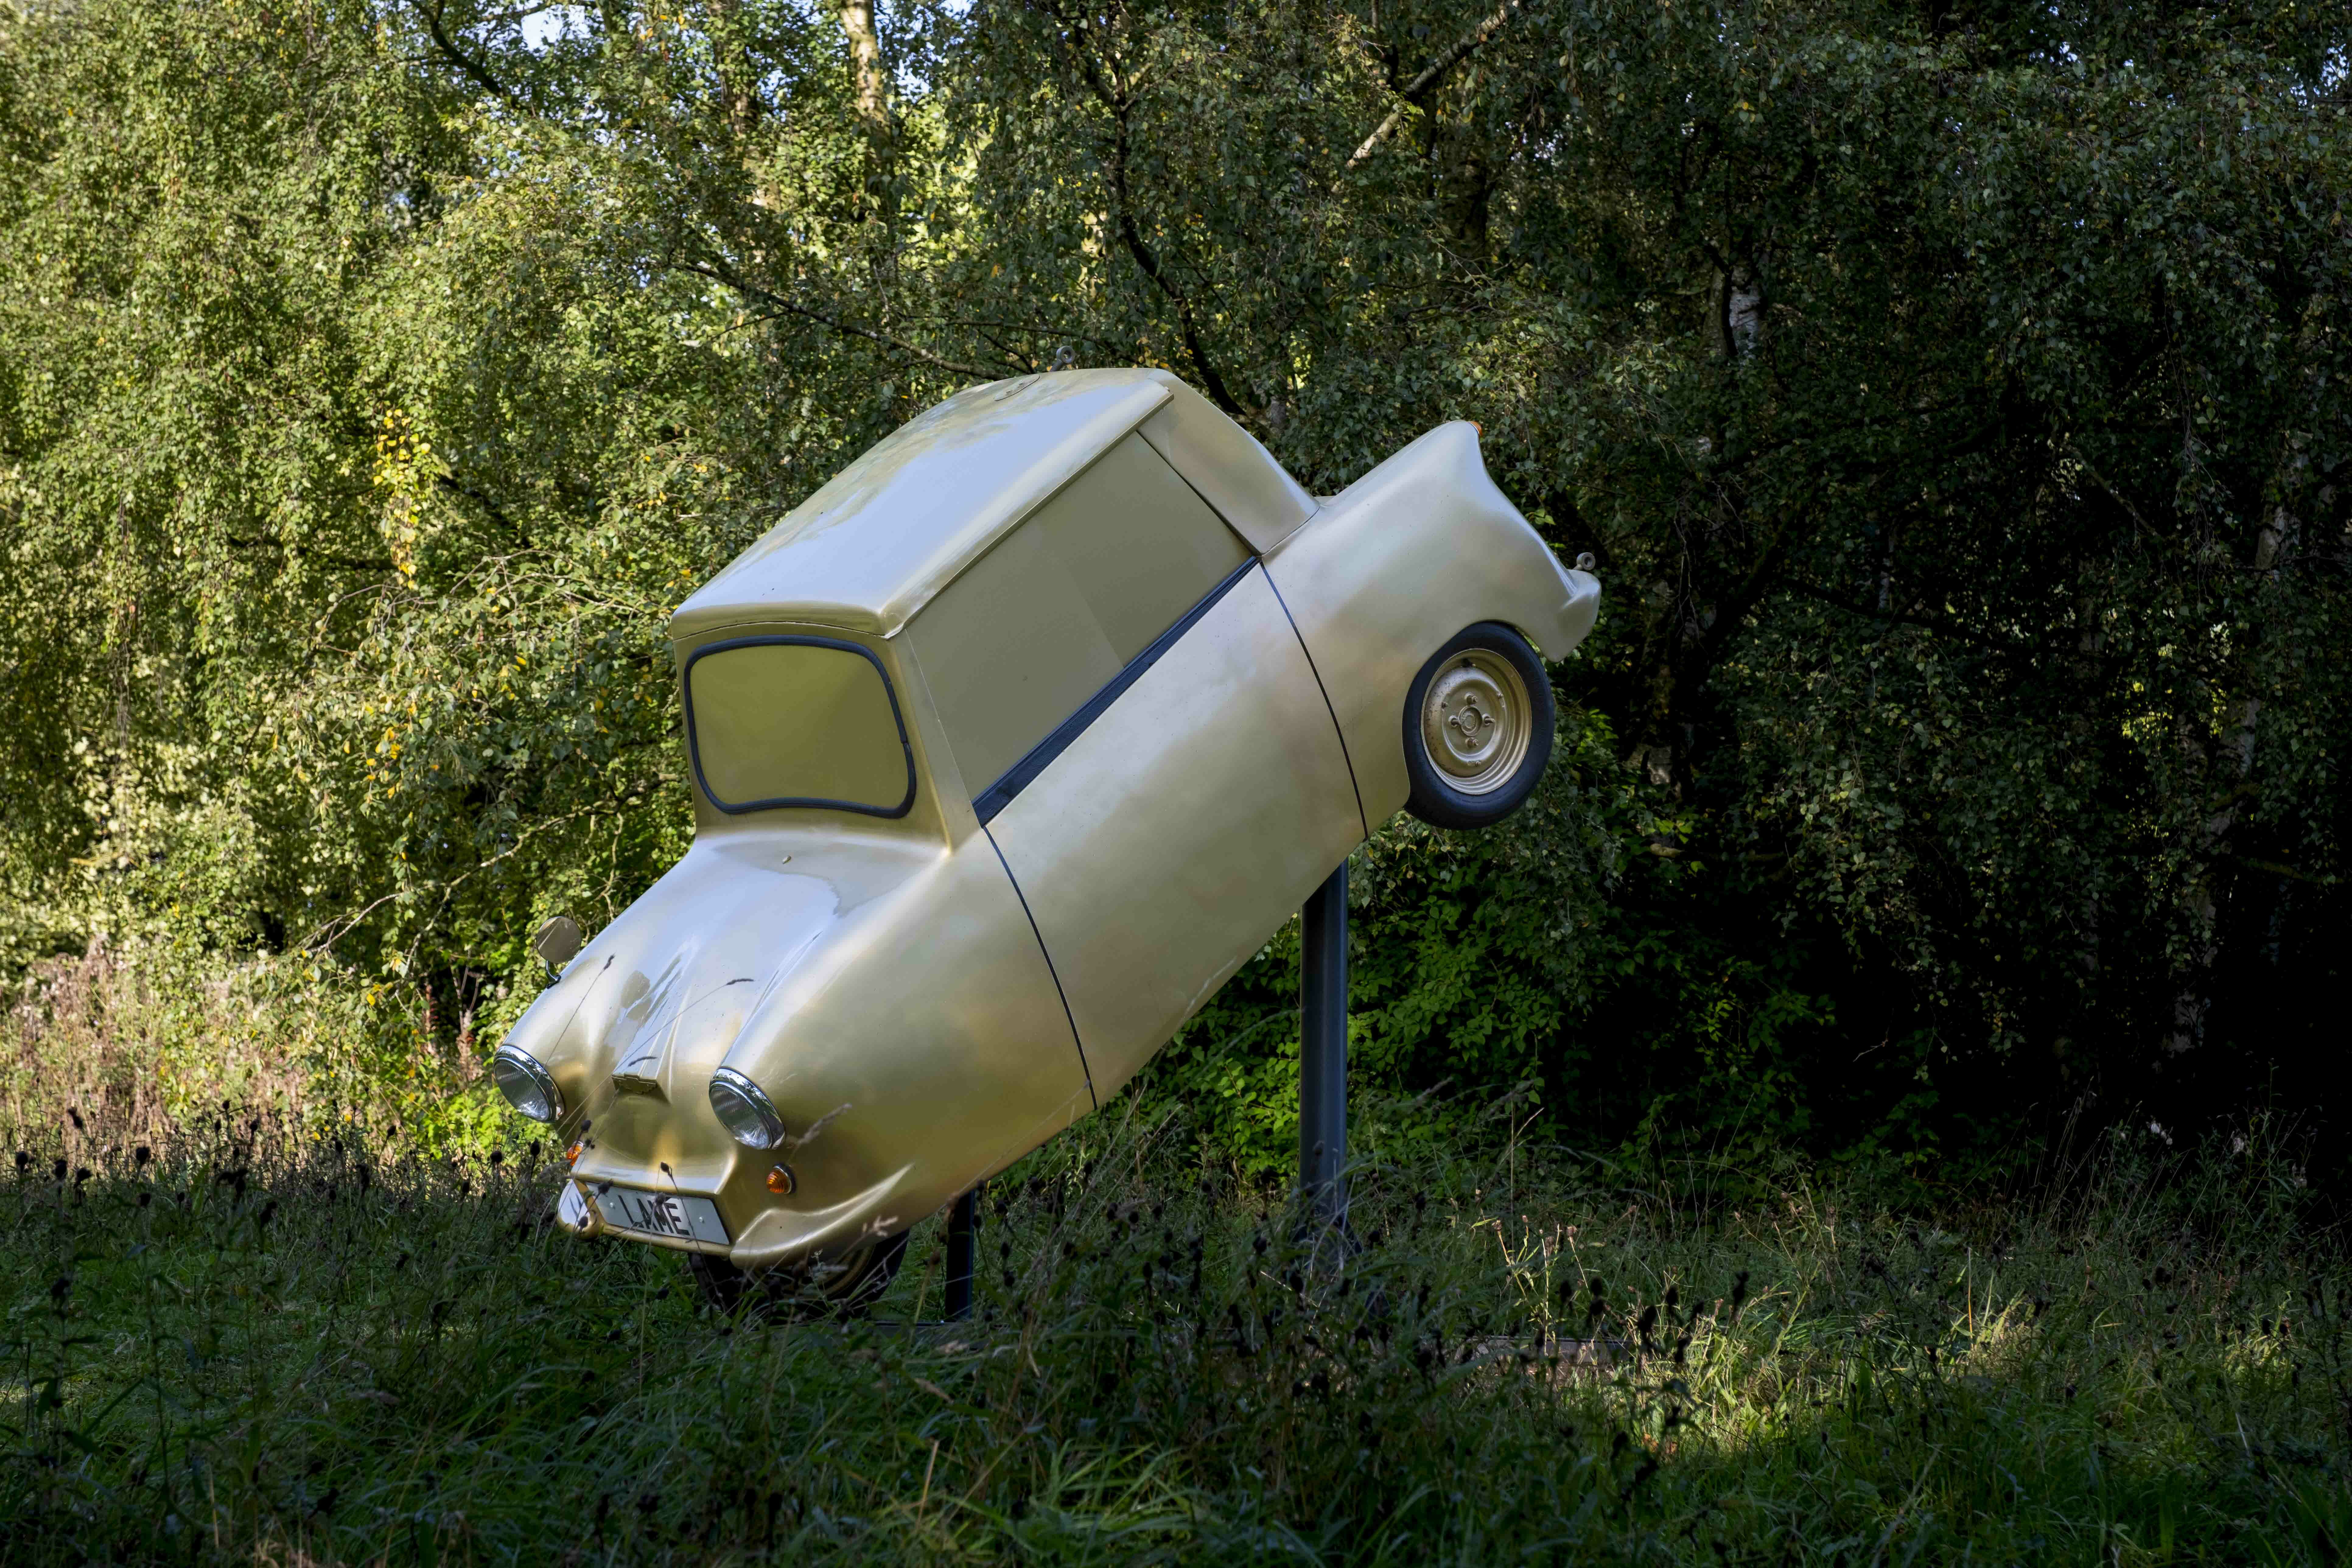 A small gold car suspended at a 45 degree angle with trees behind it.